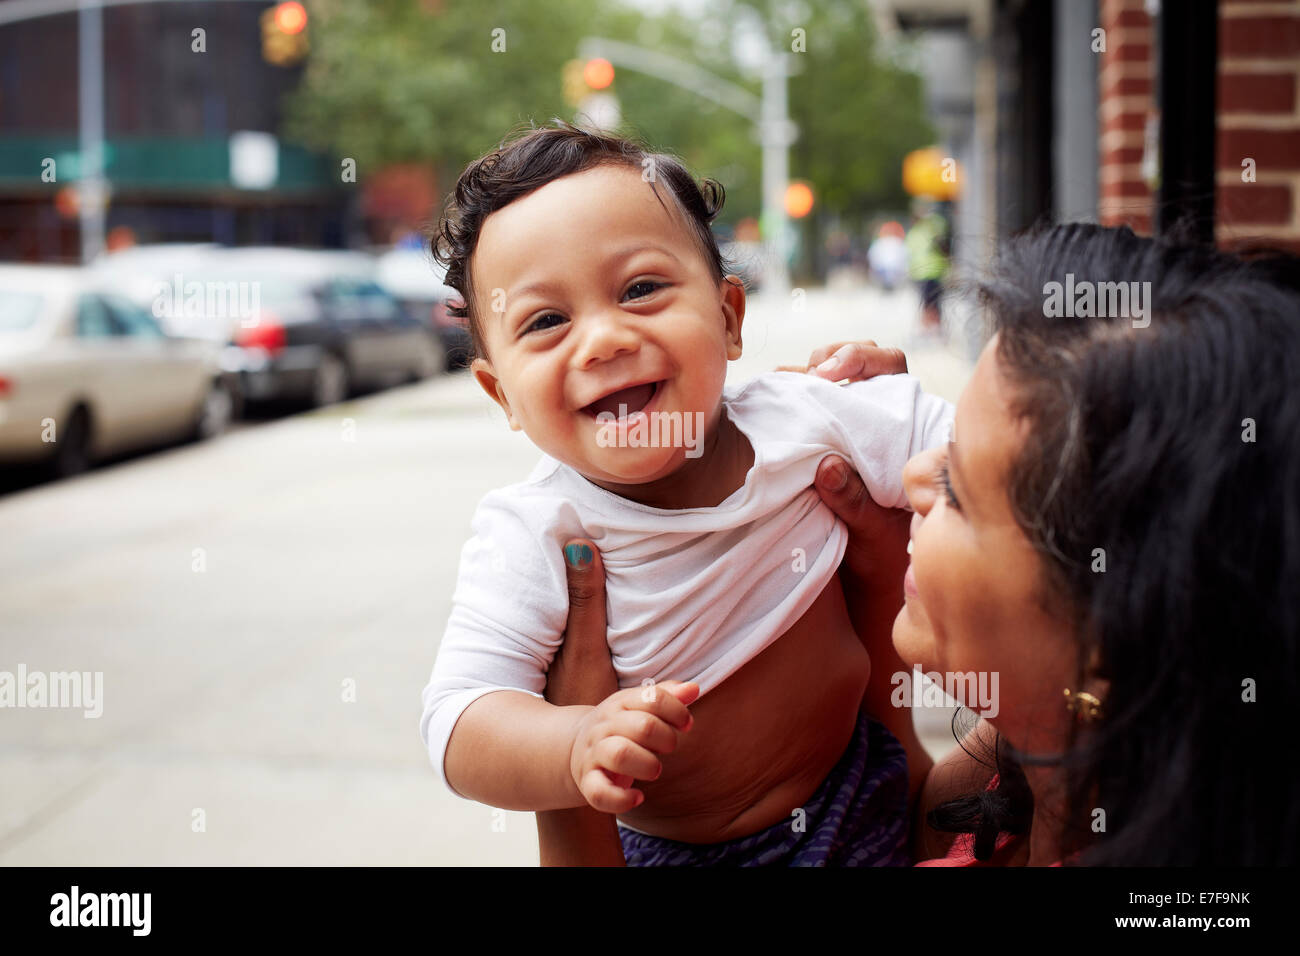 Mother playing with toddler son on city street Stock Photo